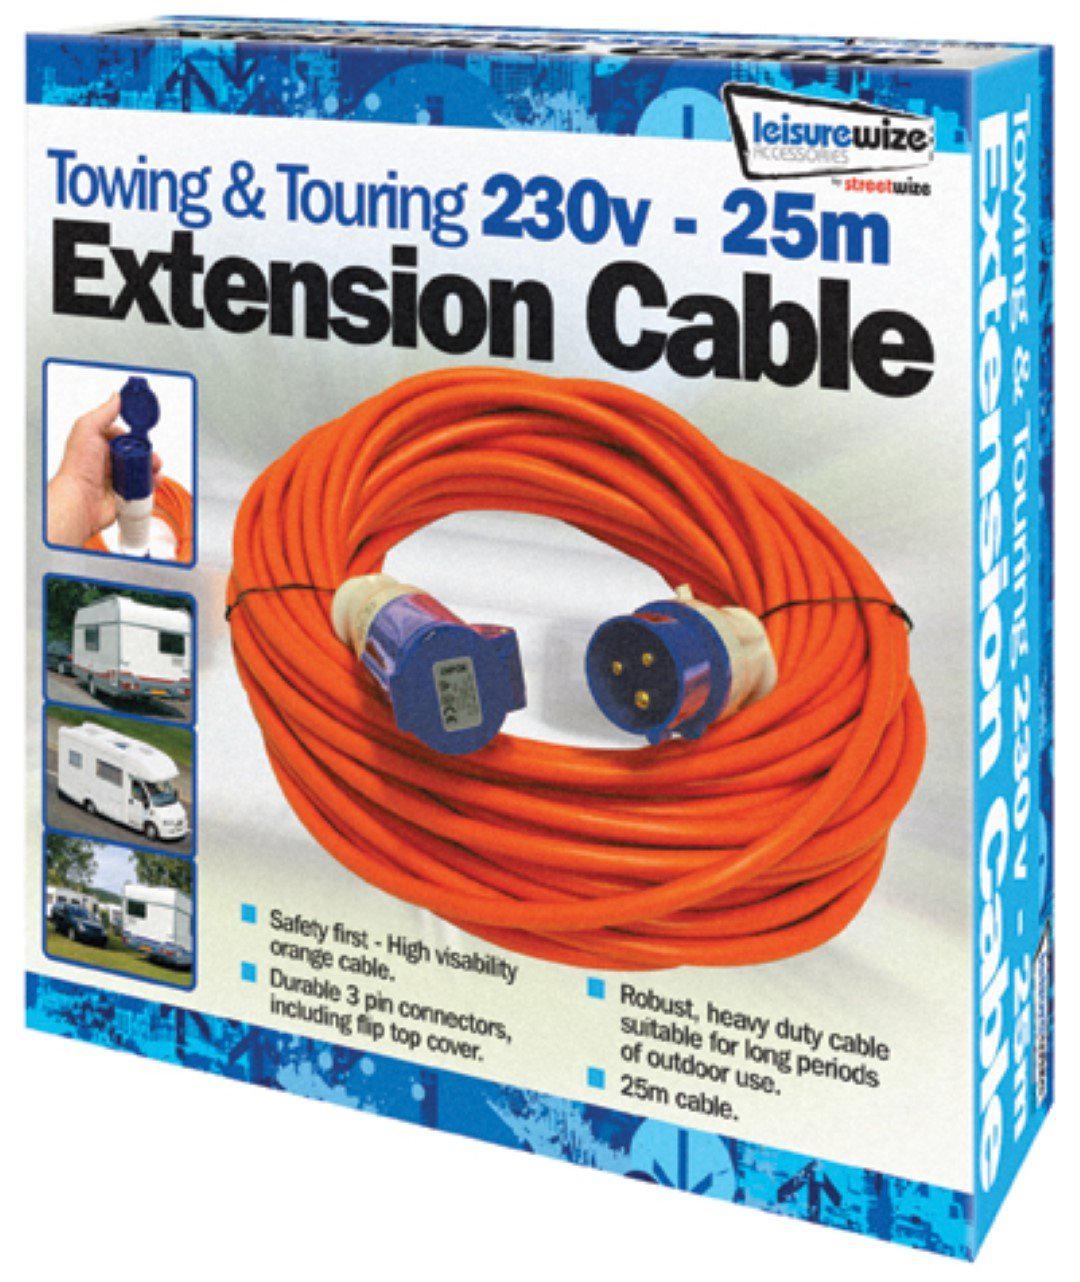 25 Metre Camping Extension Cable – Leisurewize – Campers & Leisure